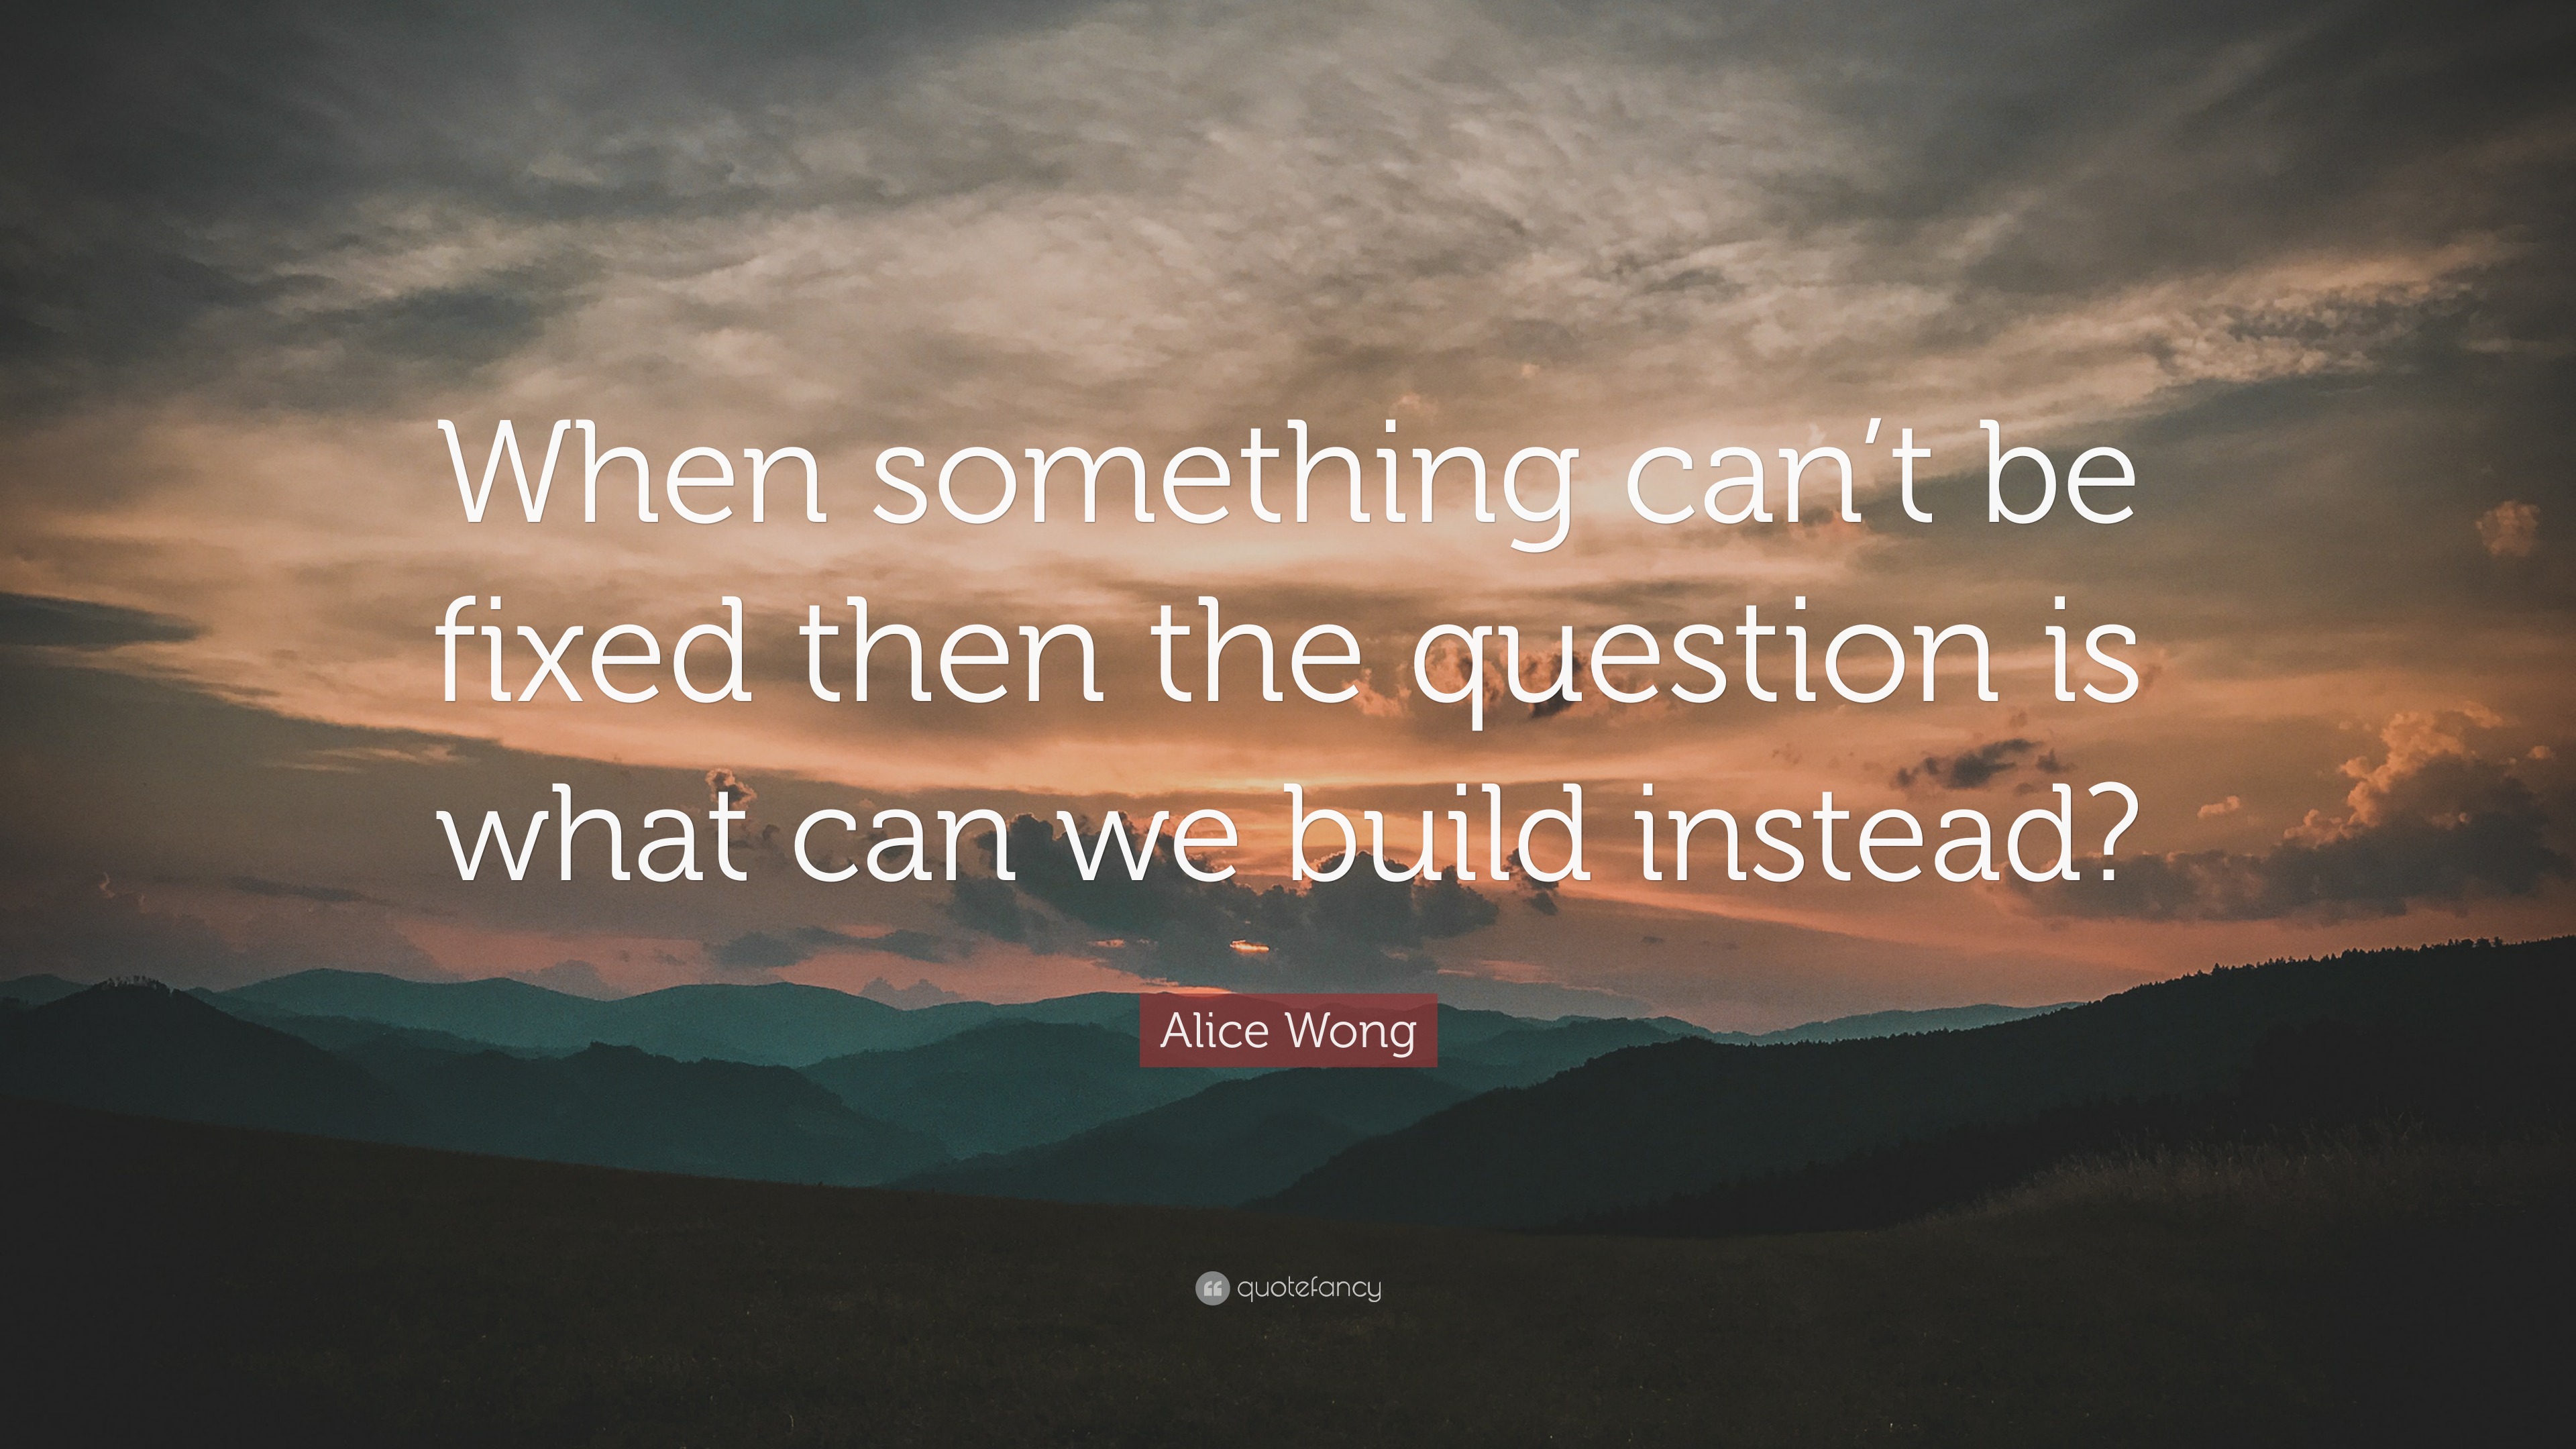 Alice Wong Quote: “When something can’t be fixed then the question is ...